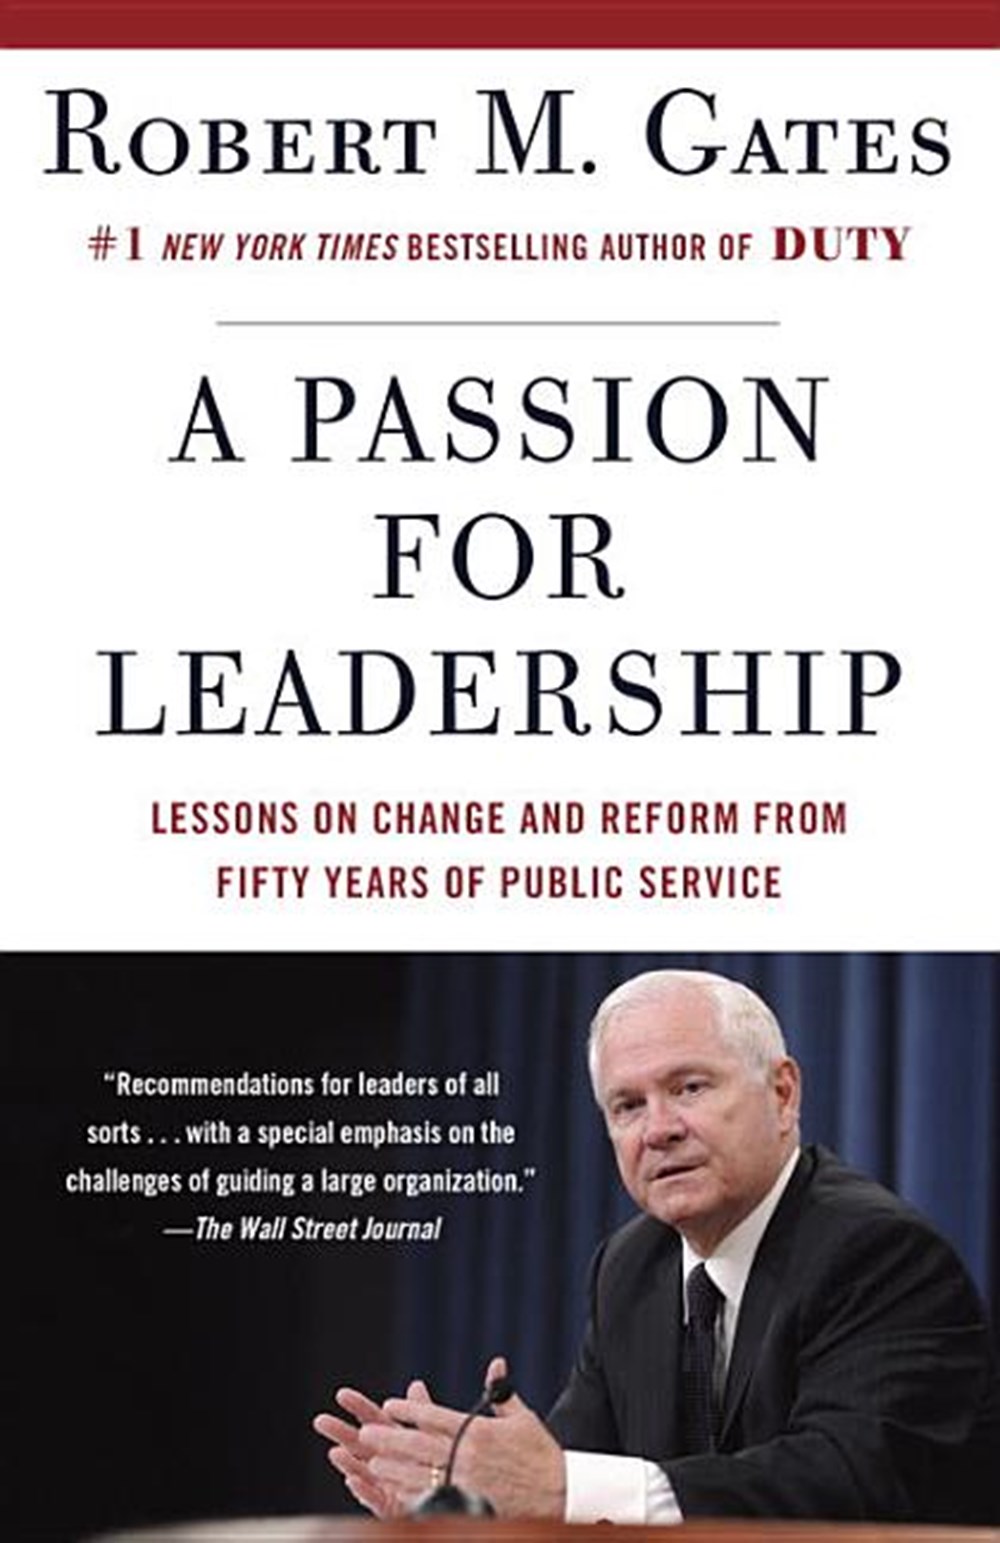 Passion for Leadership: Lessons on Change and Reform from Fifty Years of Public Service